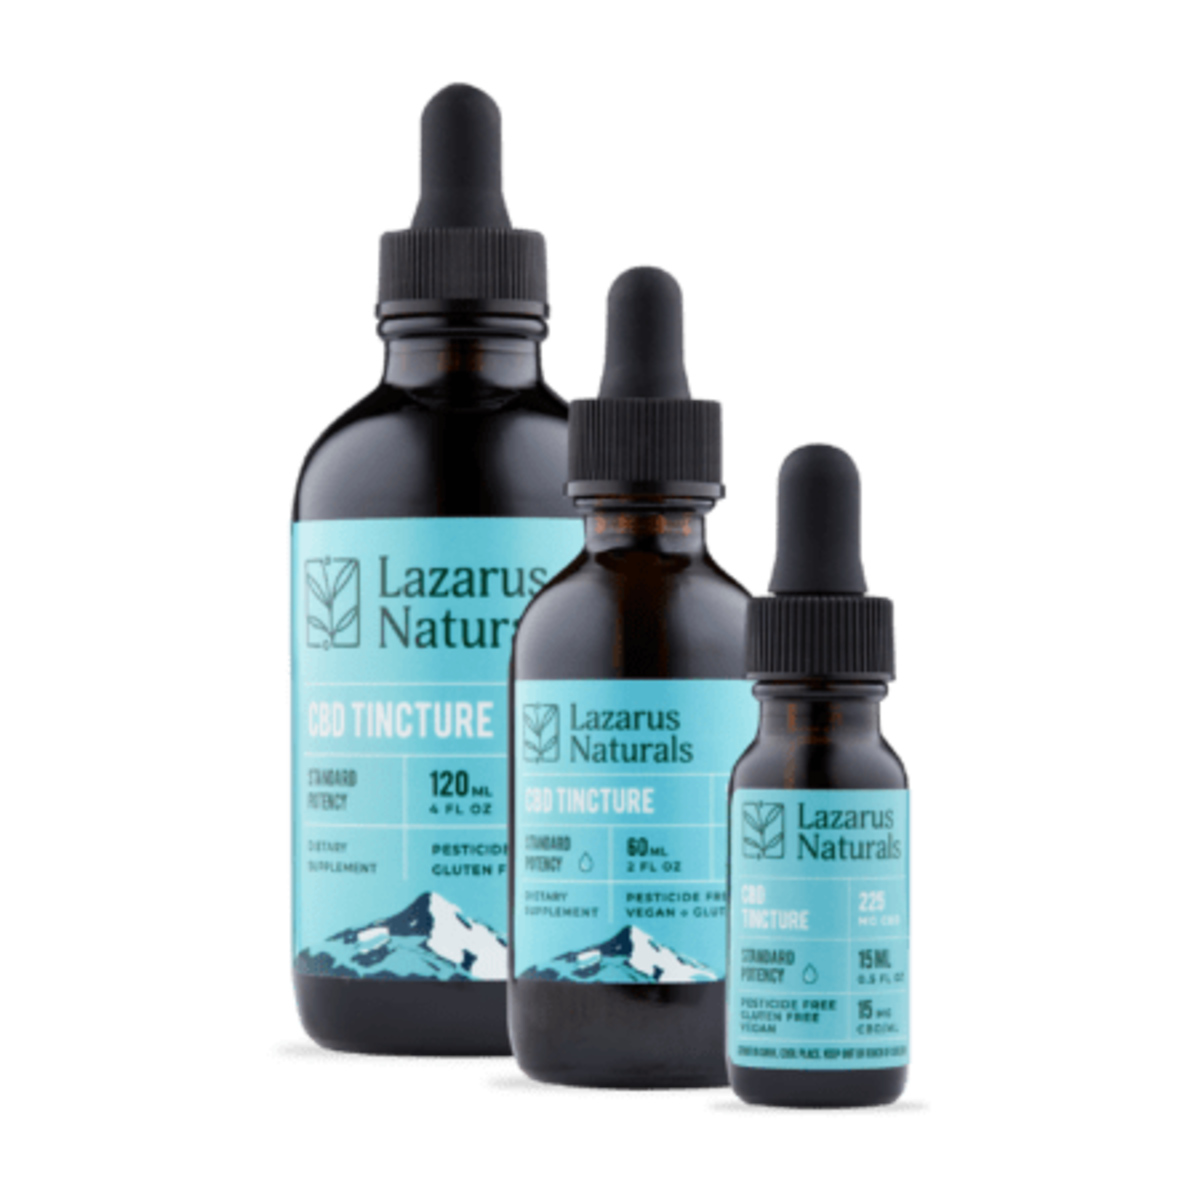 LazarusNaturals_Groupings_Tinctures_15mg-450x450